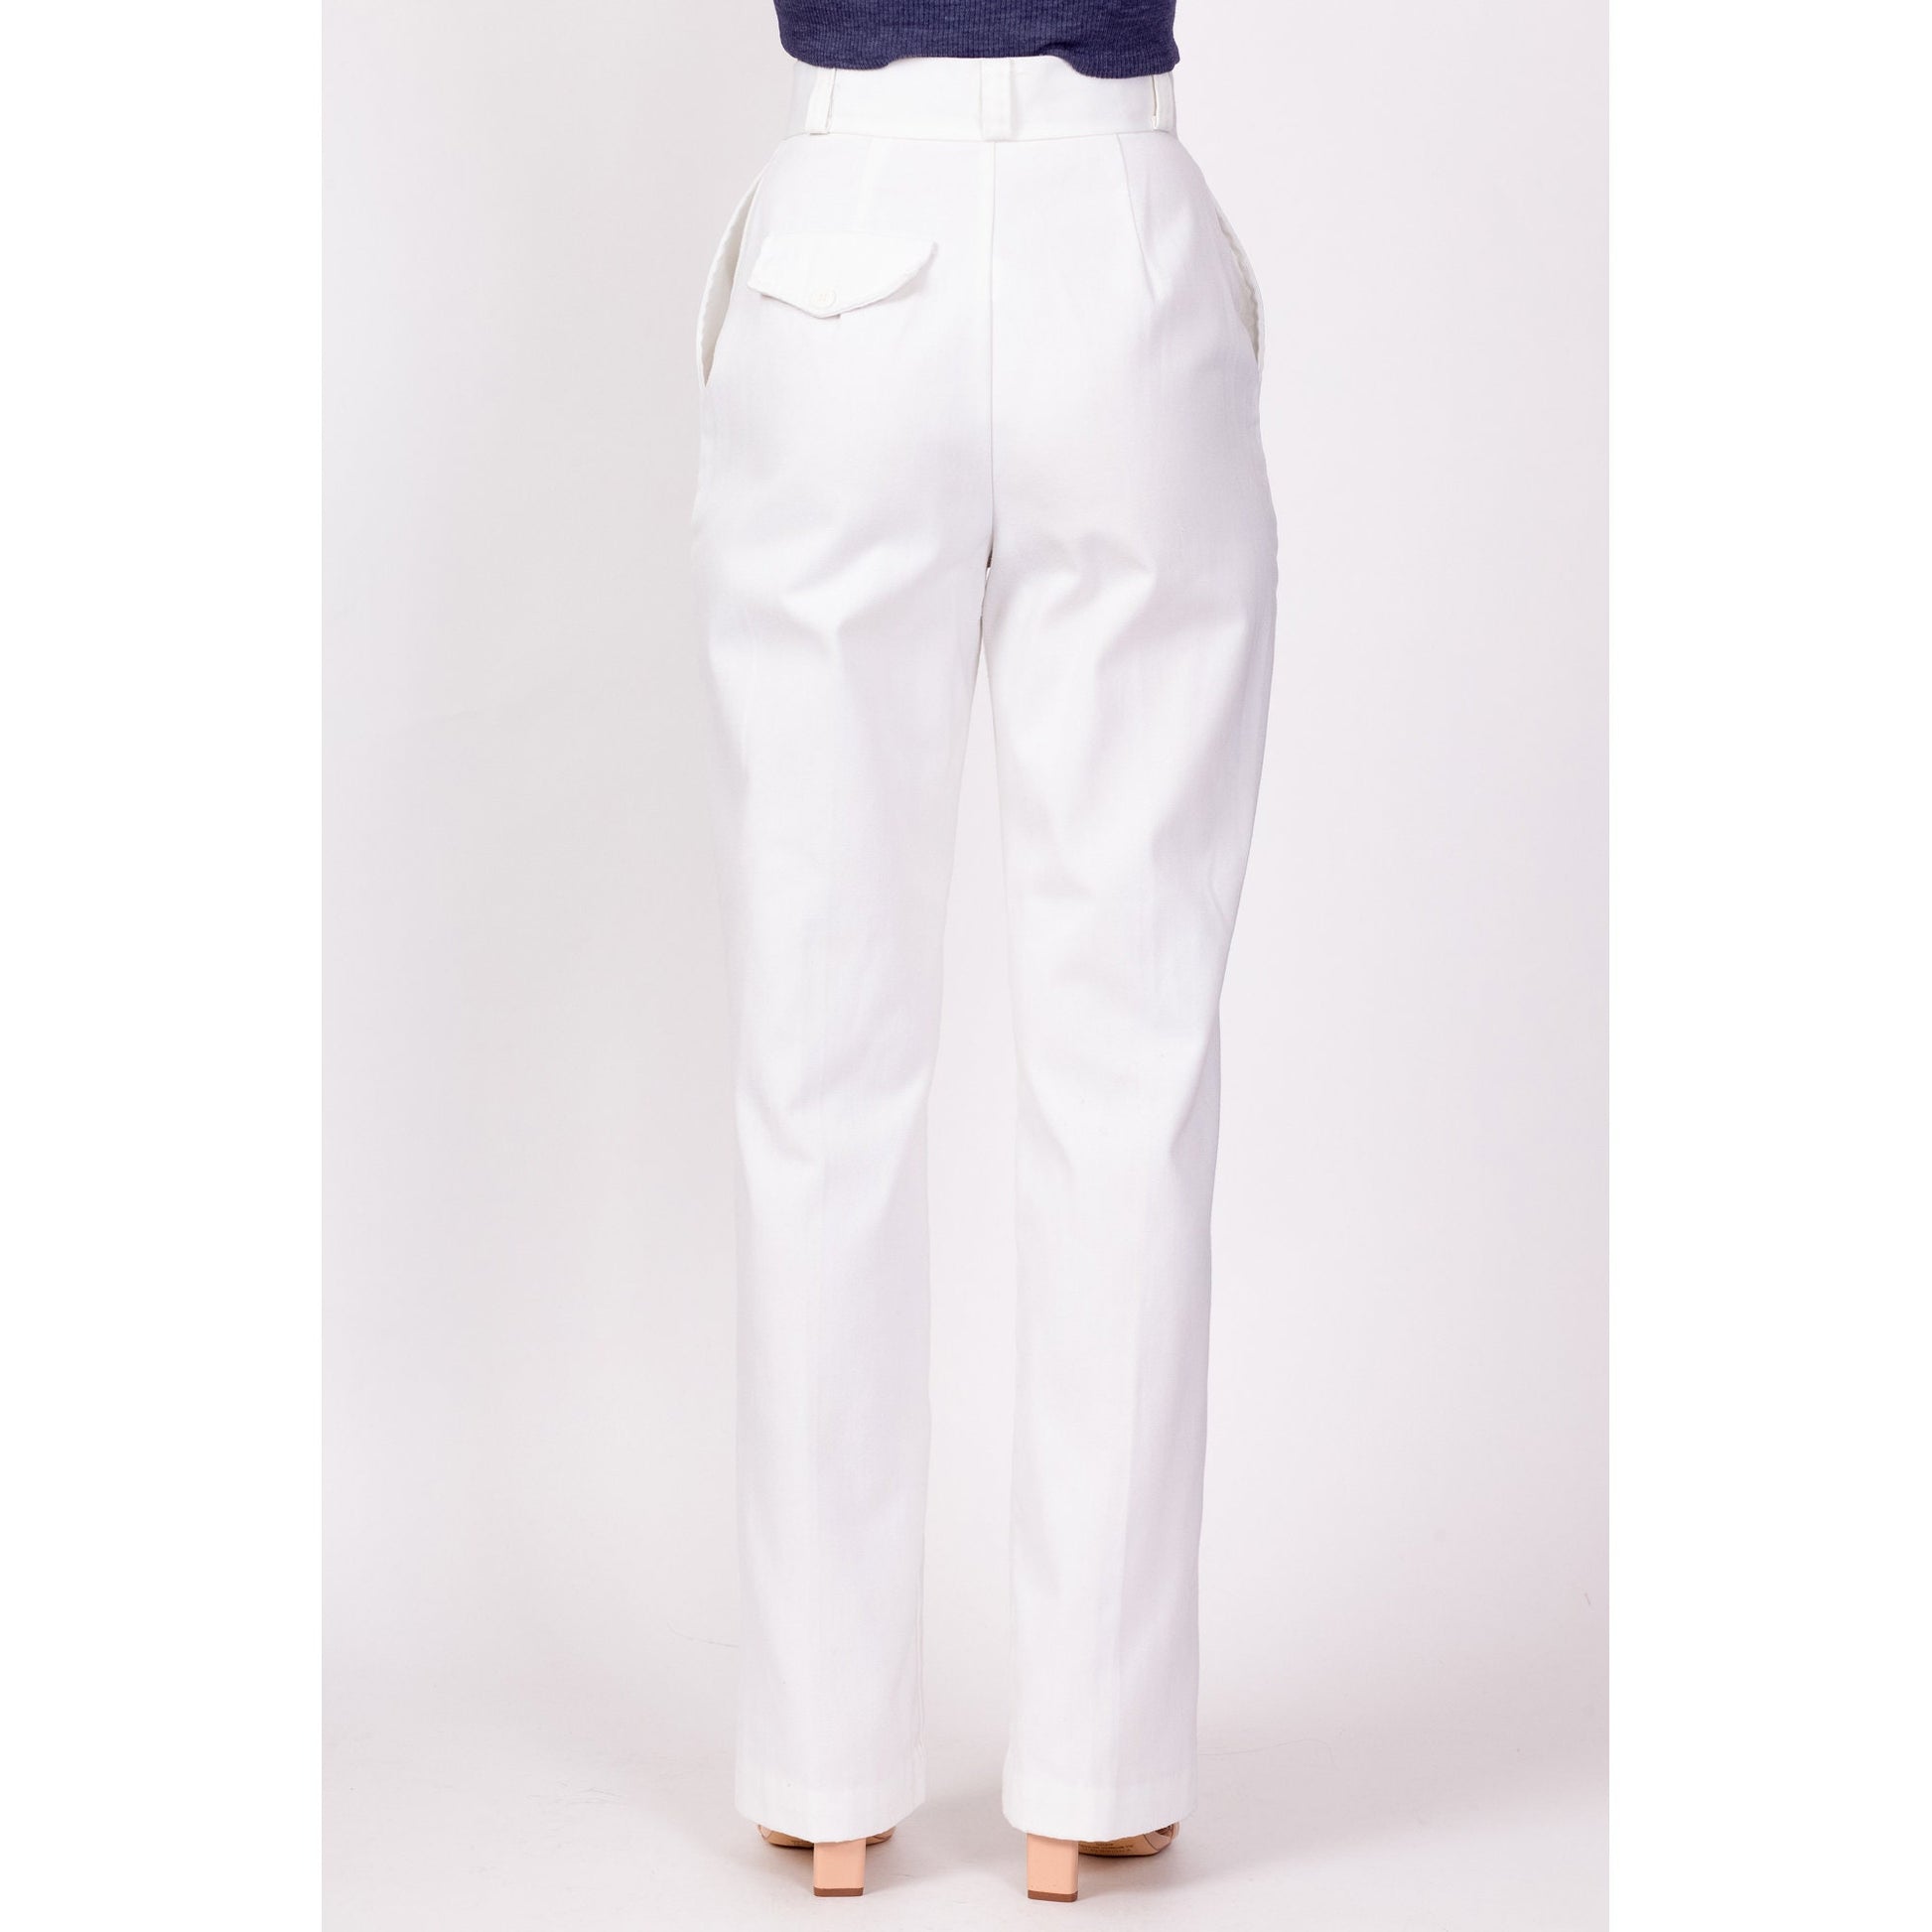 70s White High Waisted Trousers - Extra Small, 23.75" 